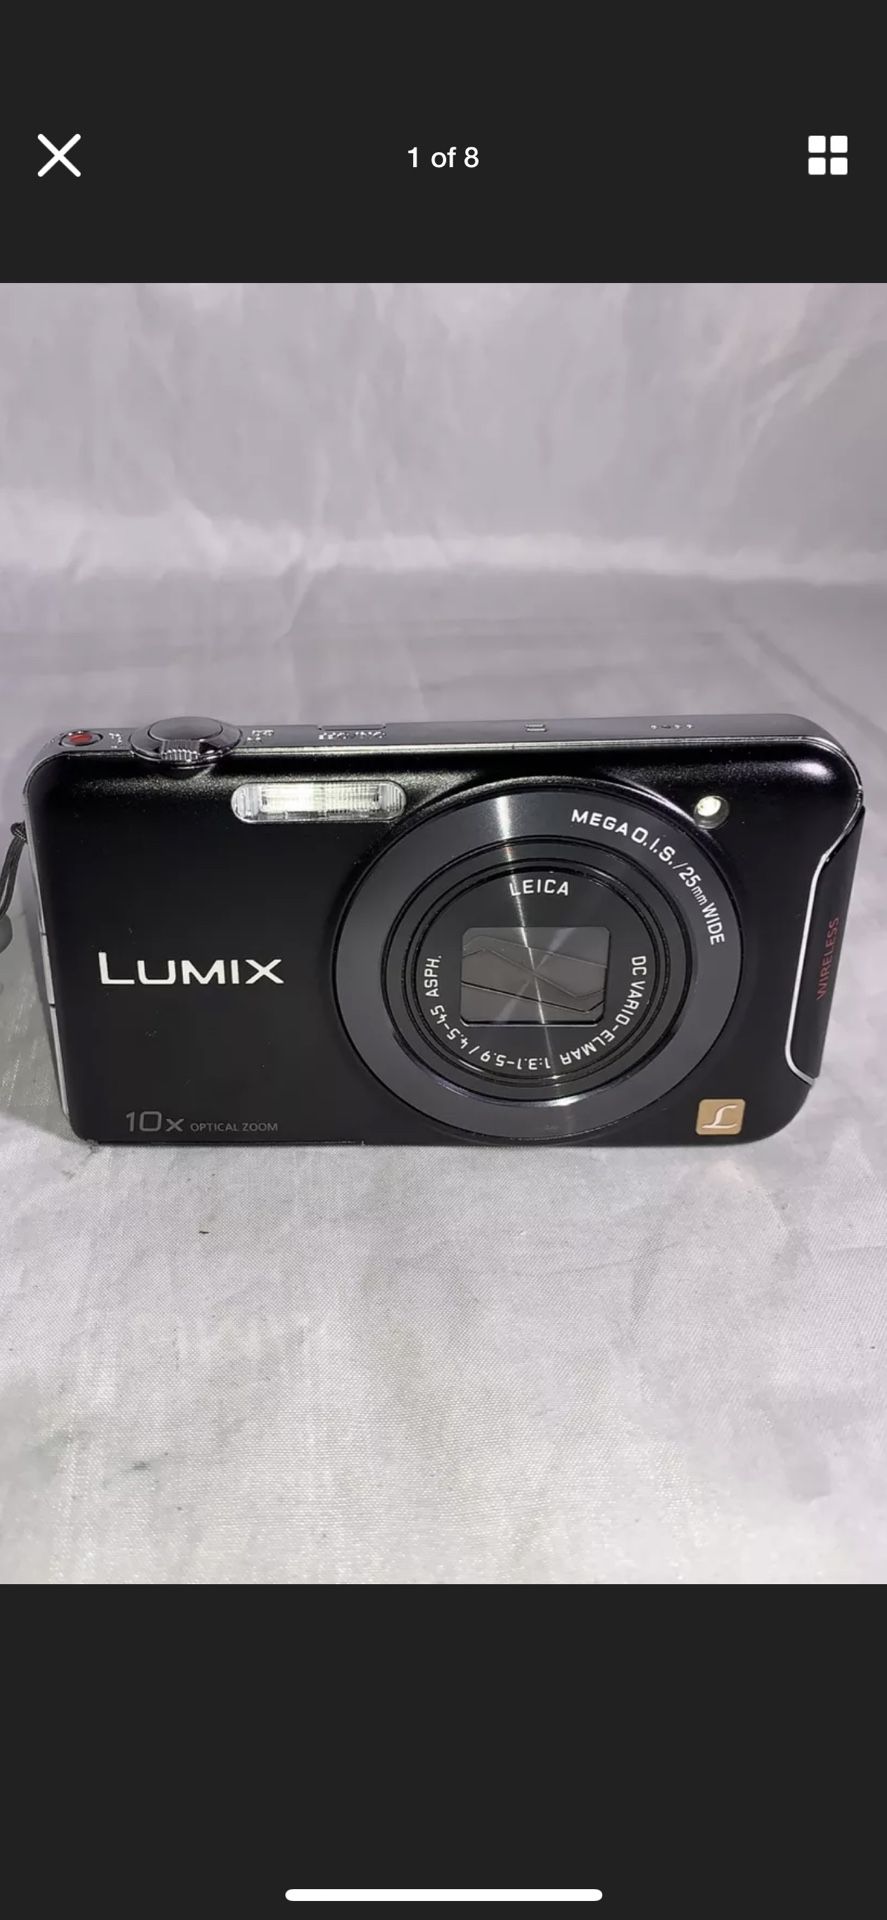 Panasonic Compact Camera Lumix WiFi DMC-SZ5 10X Optical 20X Digital Zoom (Black). Condition is "lightly Used". Does not come with memory care or char